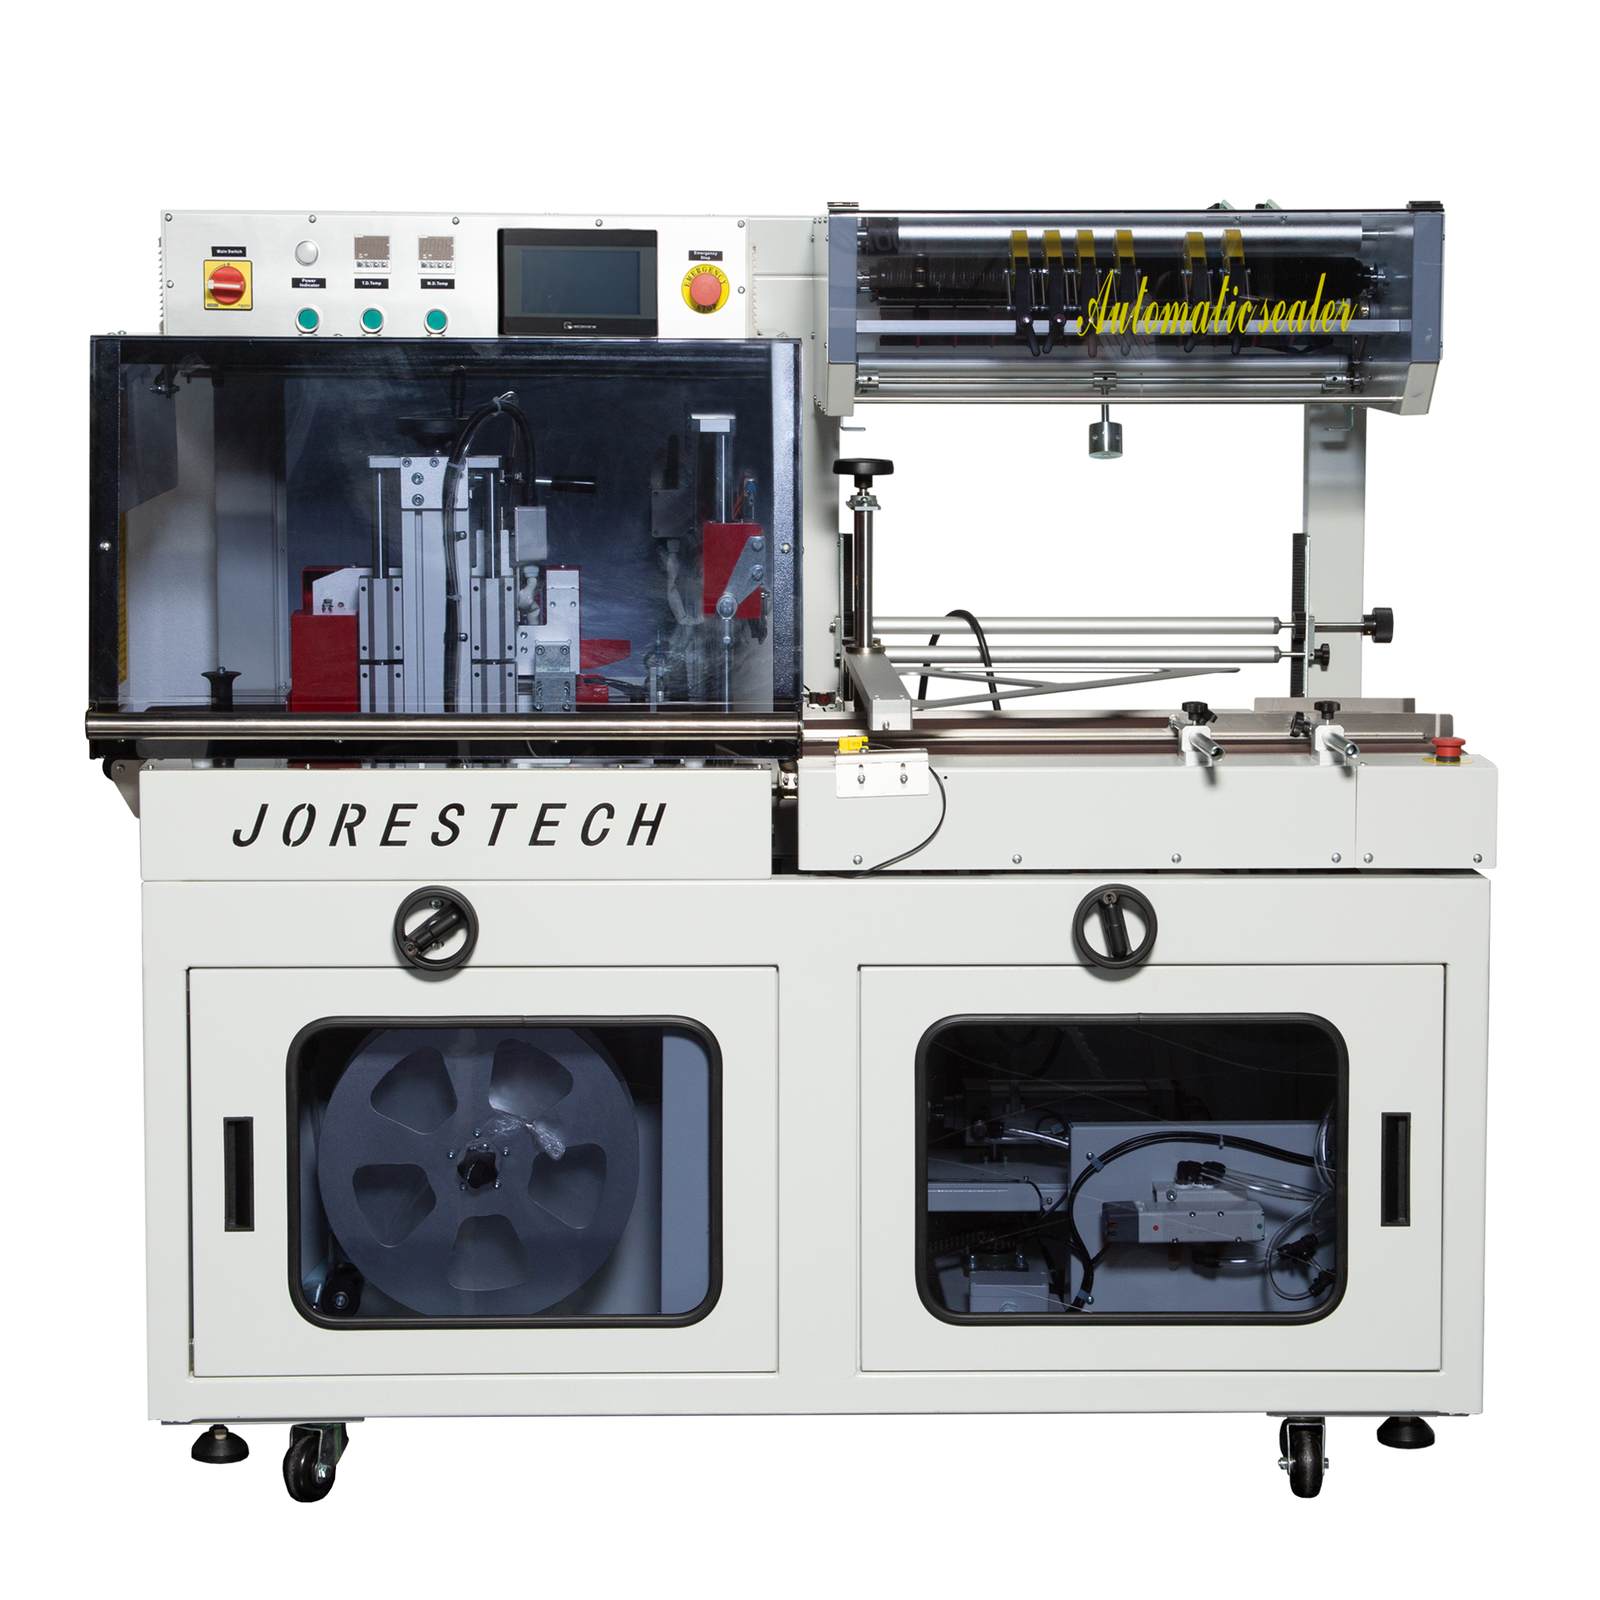 Frontal view of the JORESTECH Side Seal Sealer Machine over white background